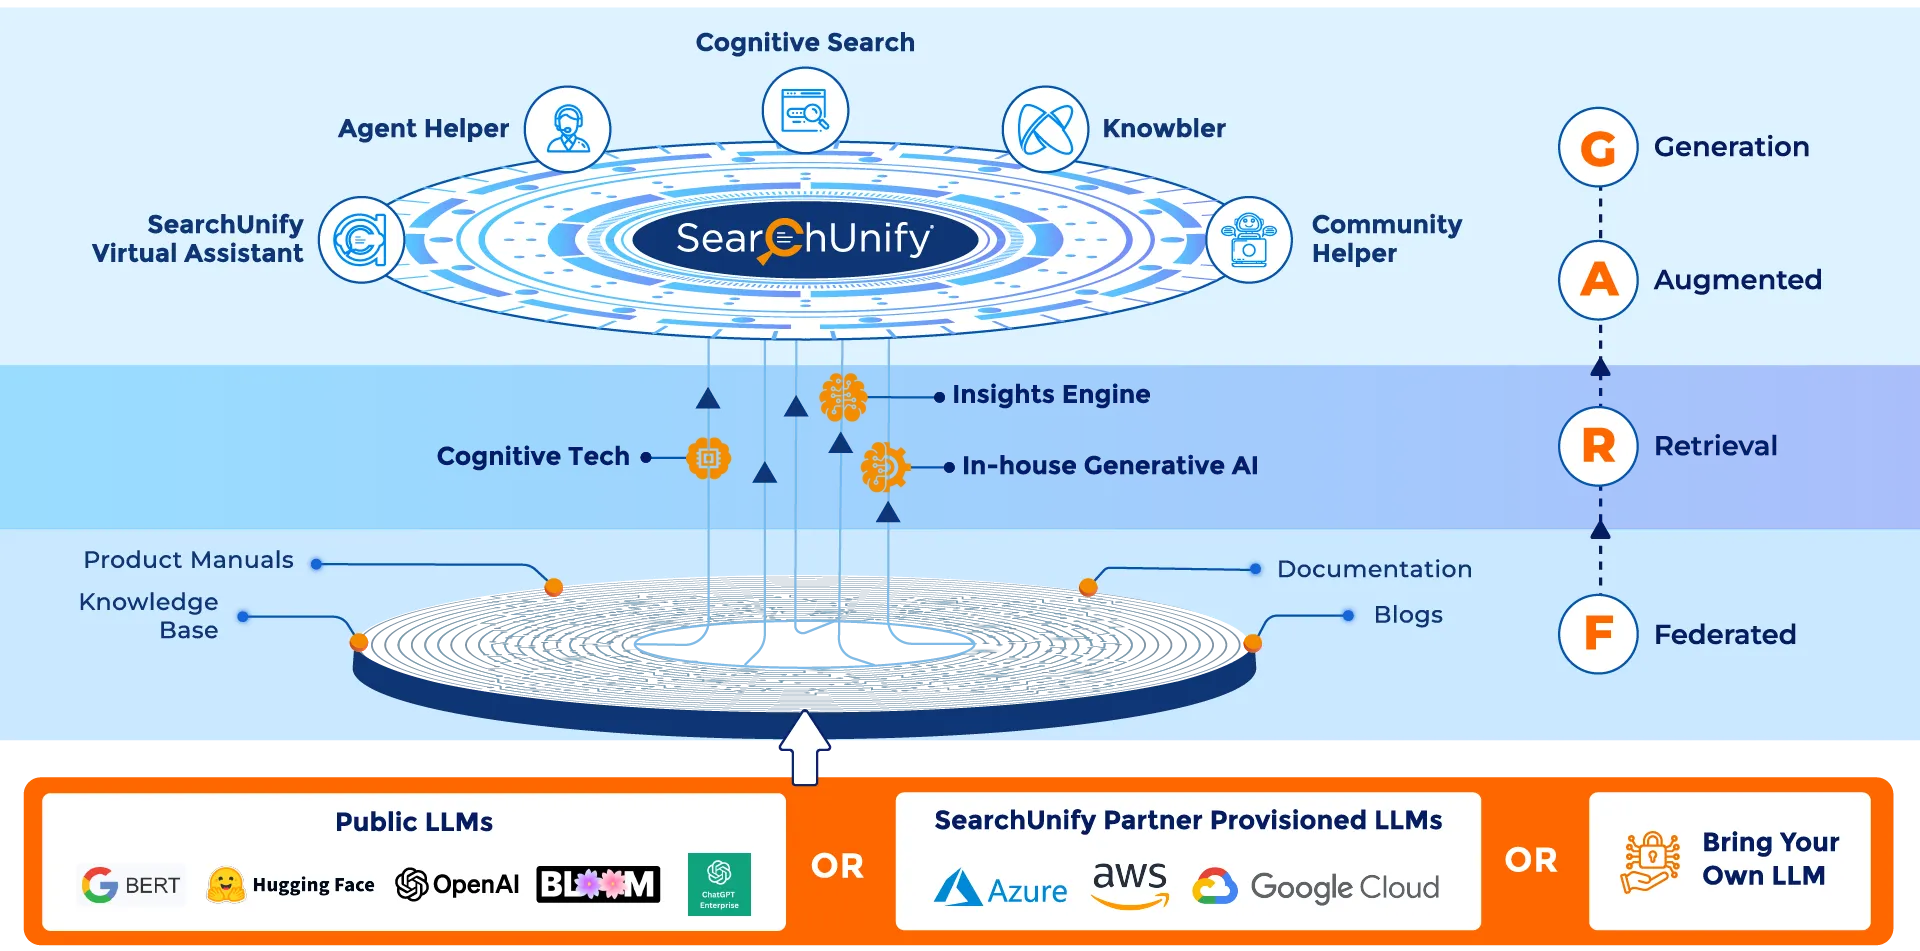 SearchUnify’s Federated Retrieval 
   Augmented Generation